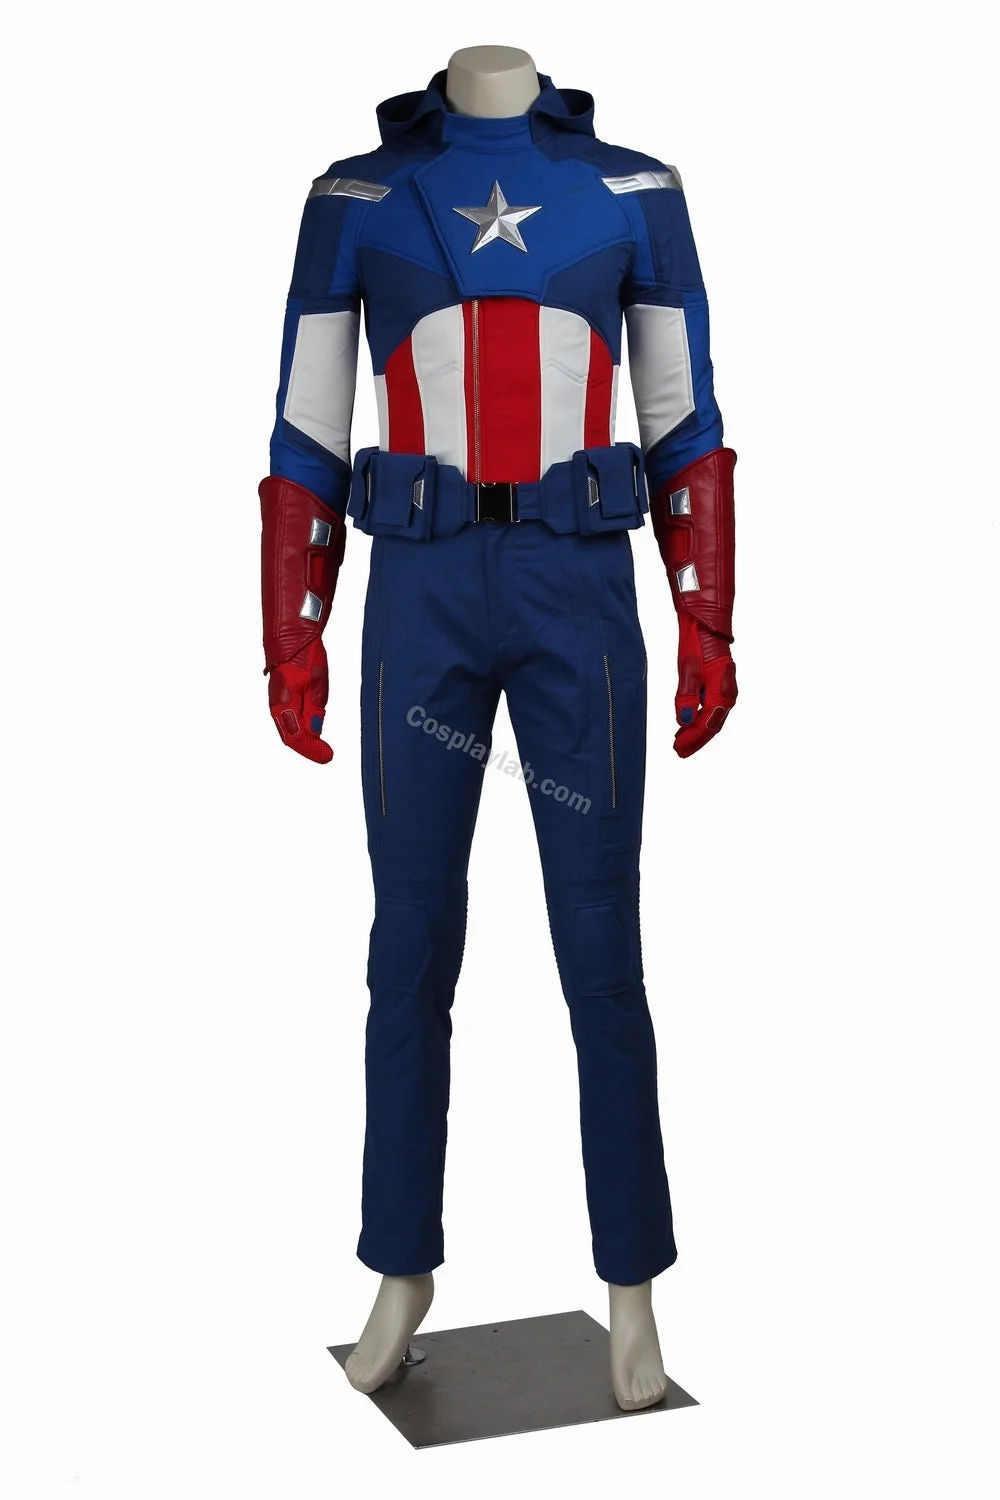 falcon captain america blue cosplay suit costume outfit uniform By CosplayLab